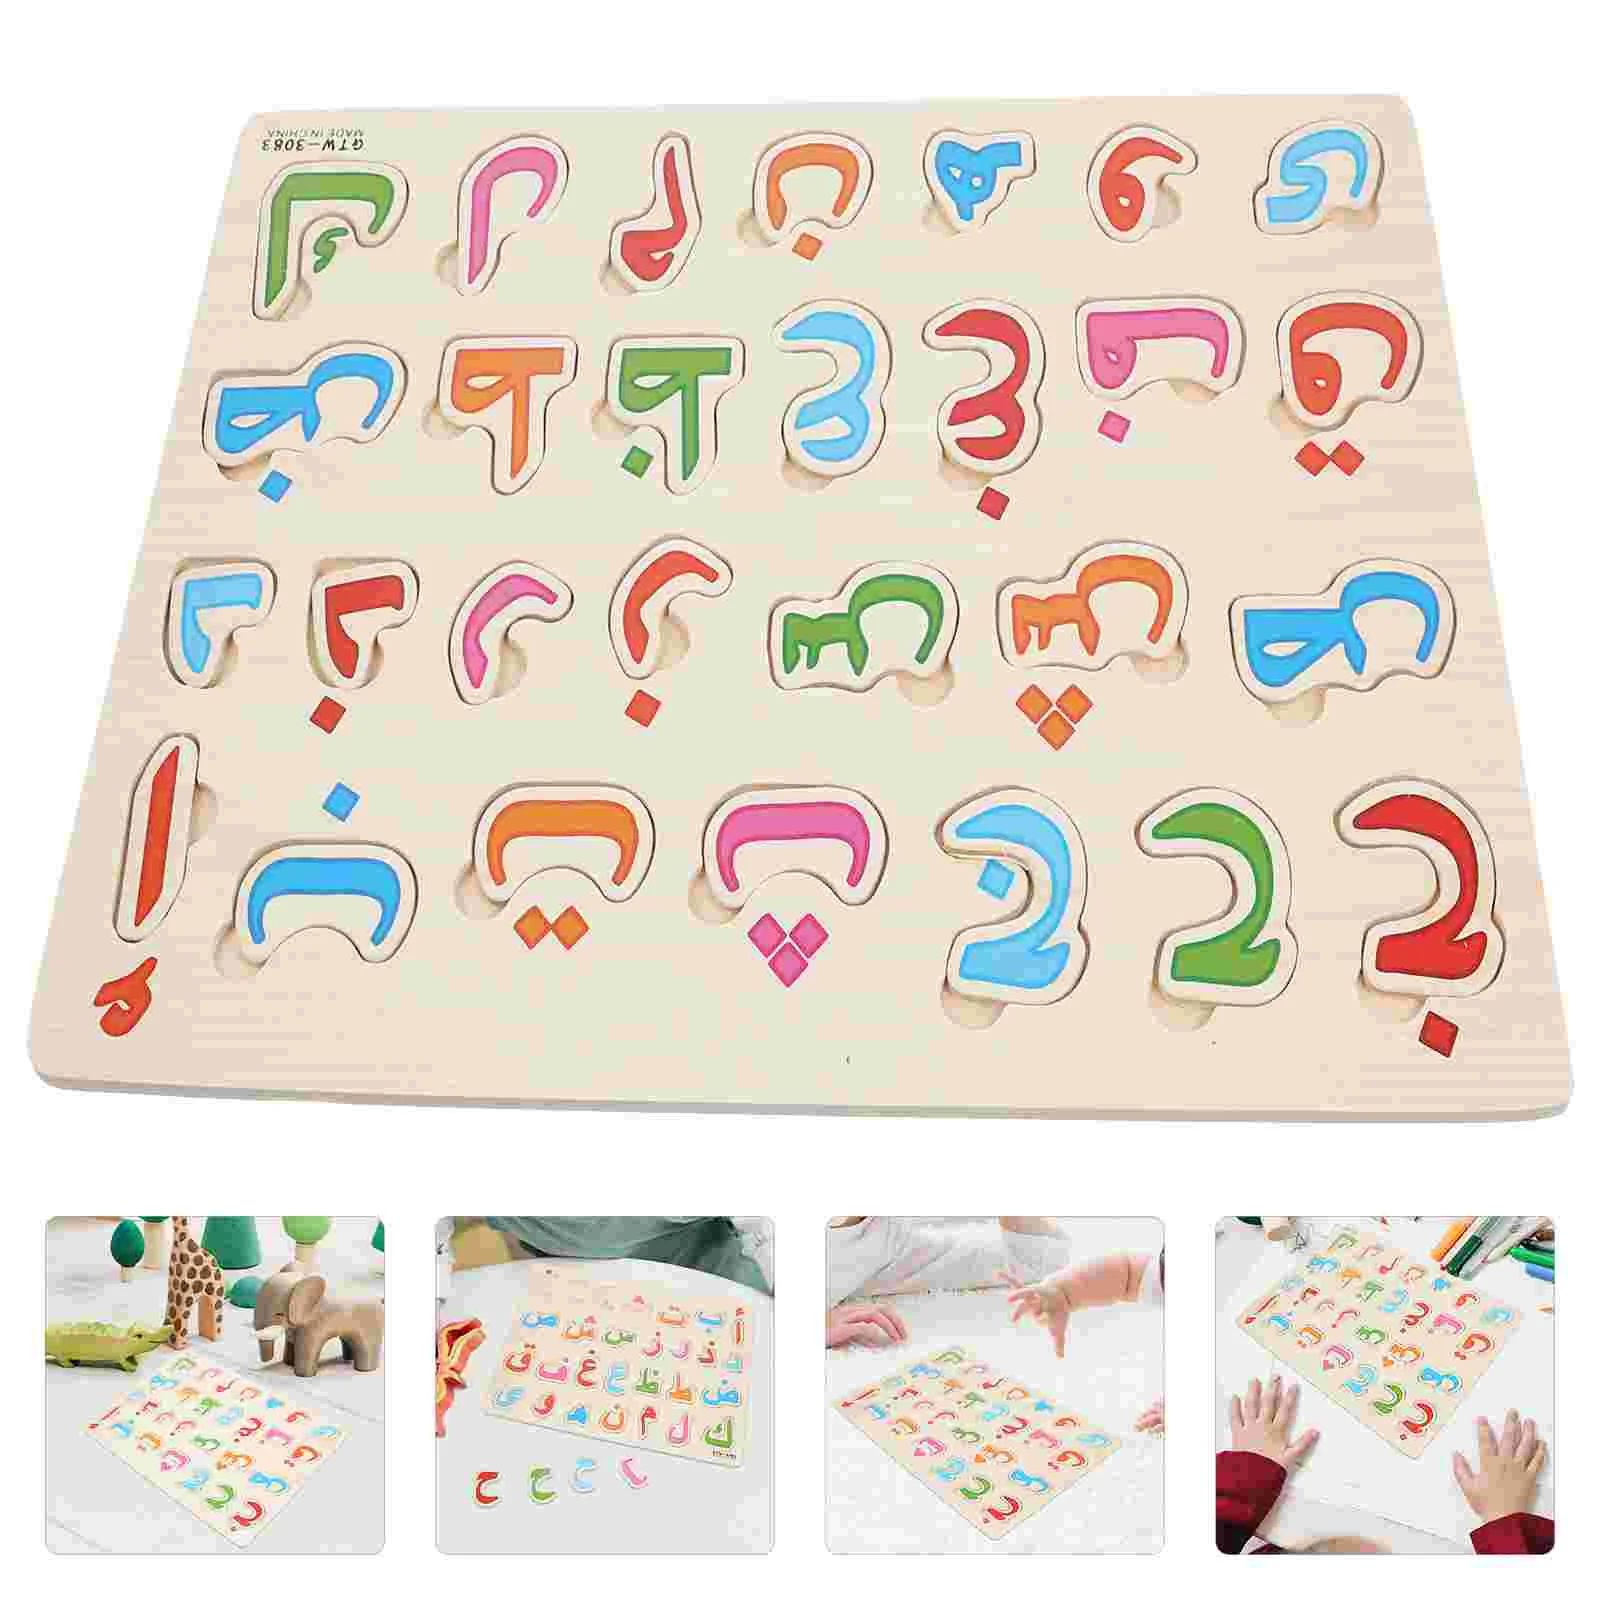 

Arabic Puzzle Wood Children Toys Alphabet Floor Kids Education Plaything Wooden Puzzles Toddlers Preschool Matching